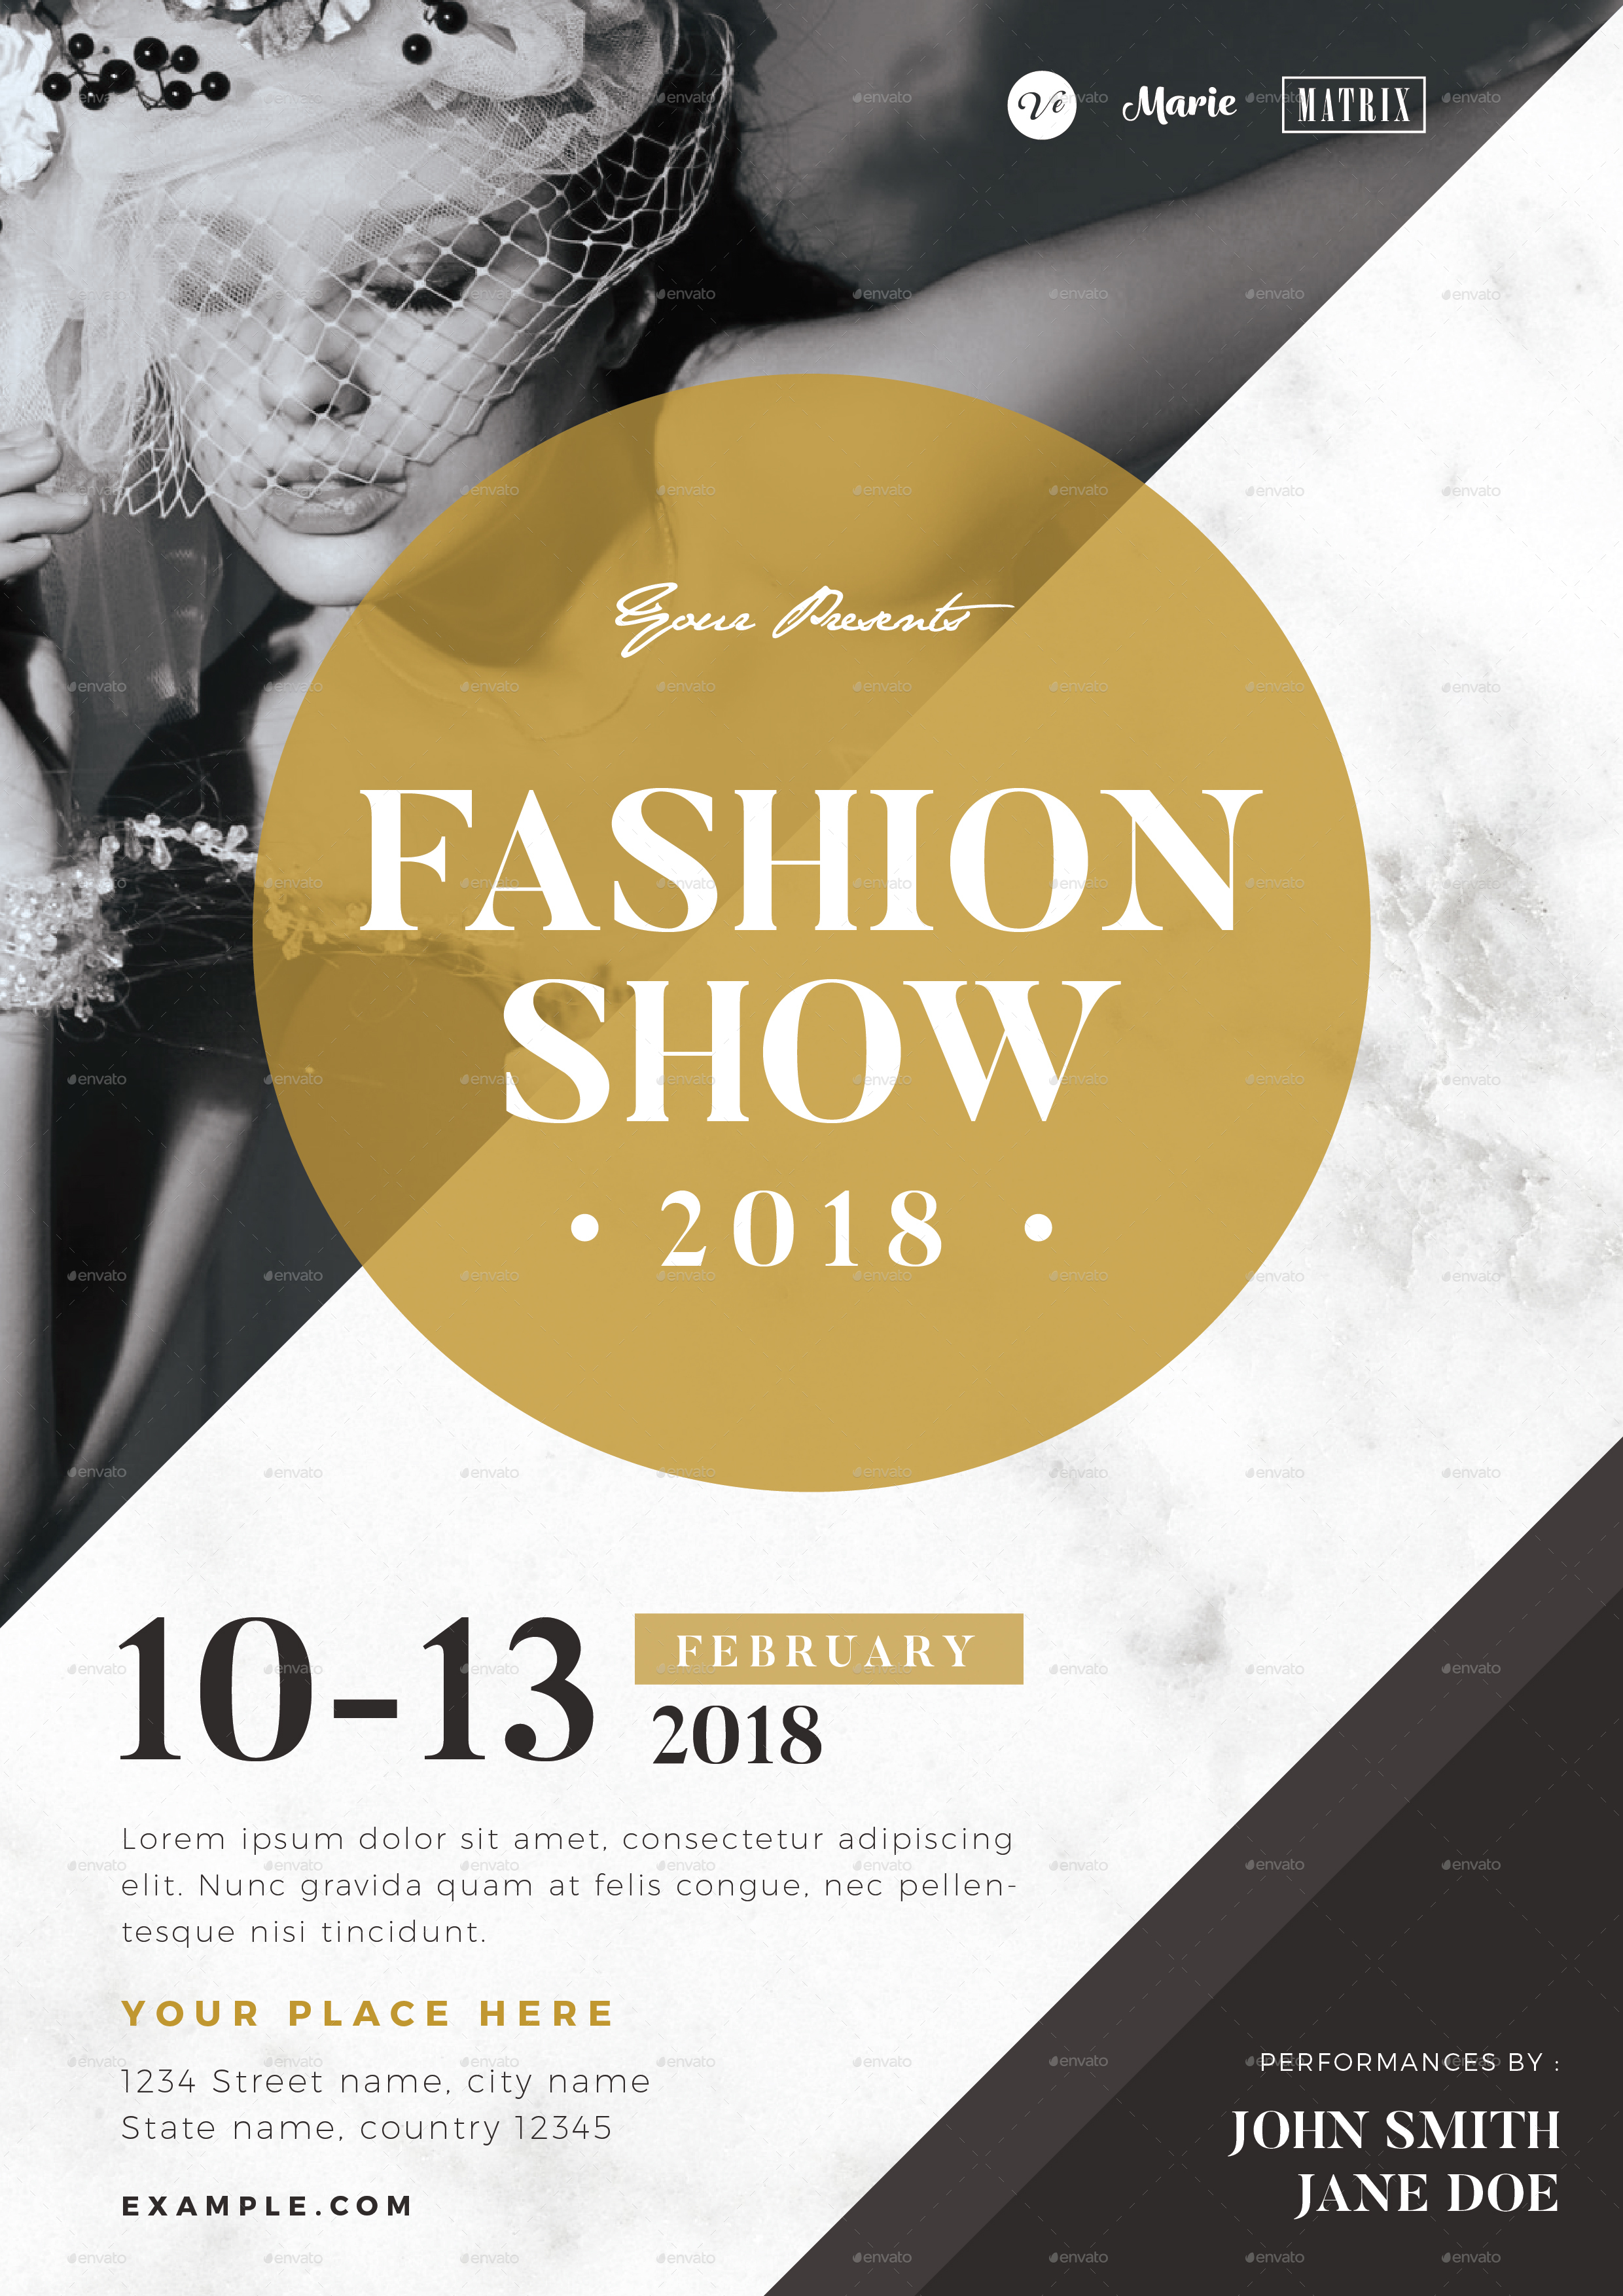 Fashion Show Flyer 02 by Vector_Vactory GraphicRiver